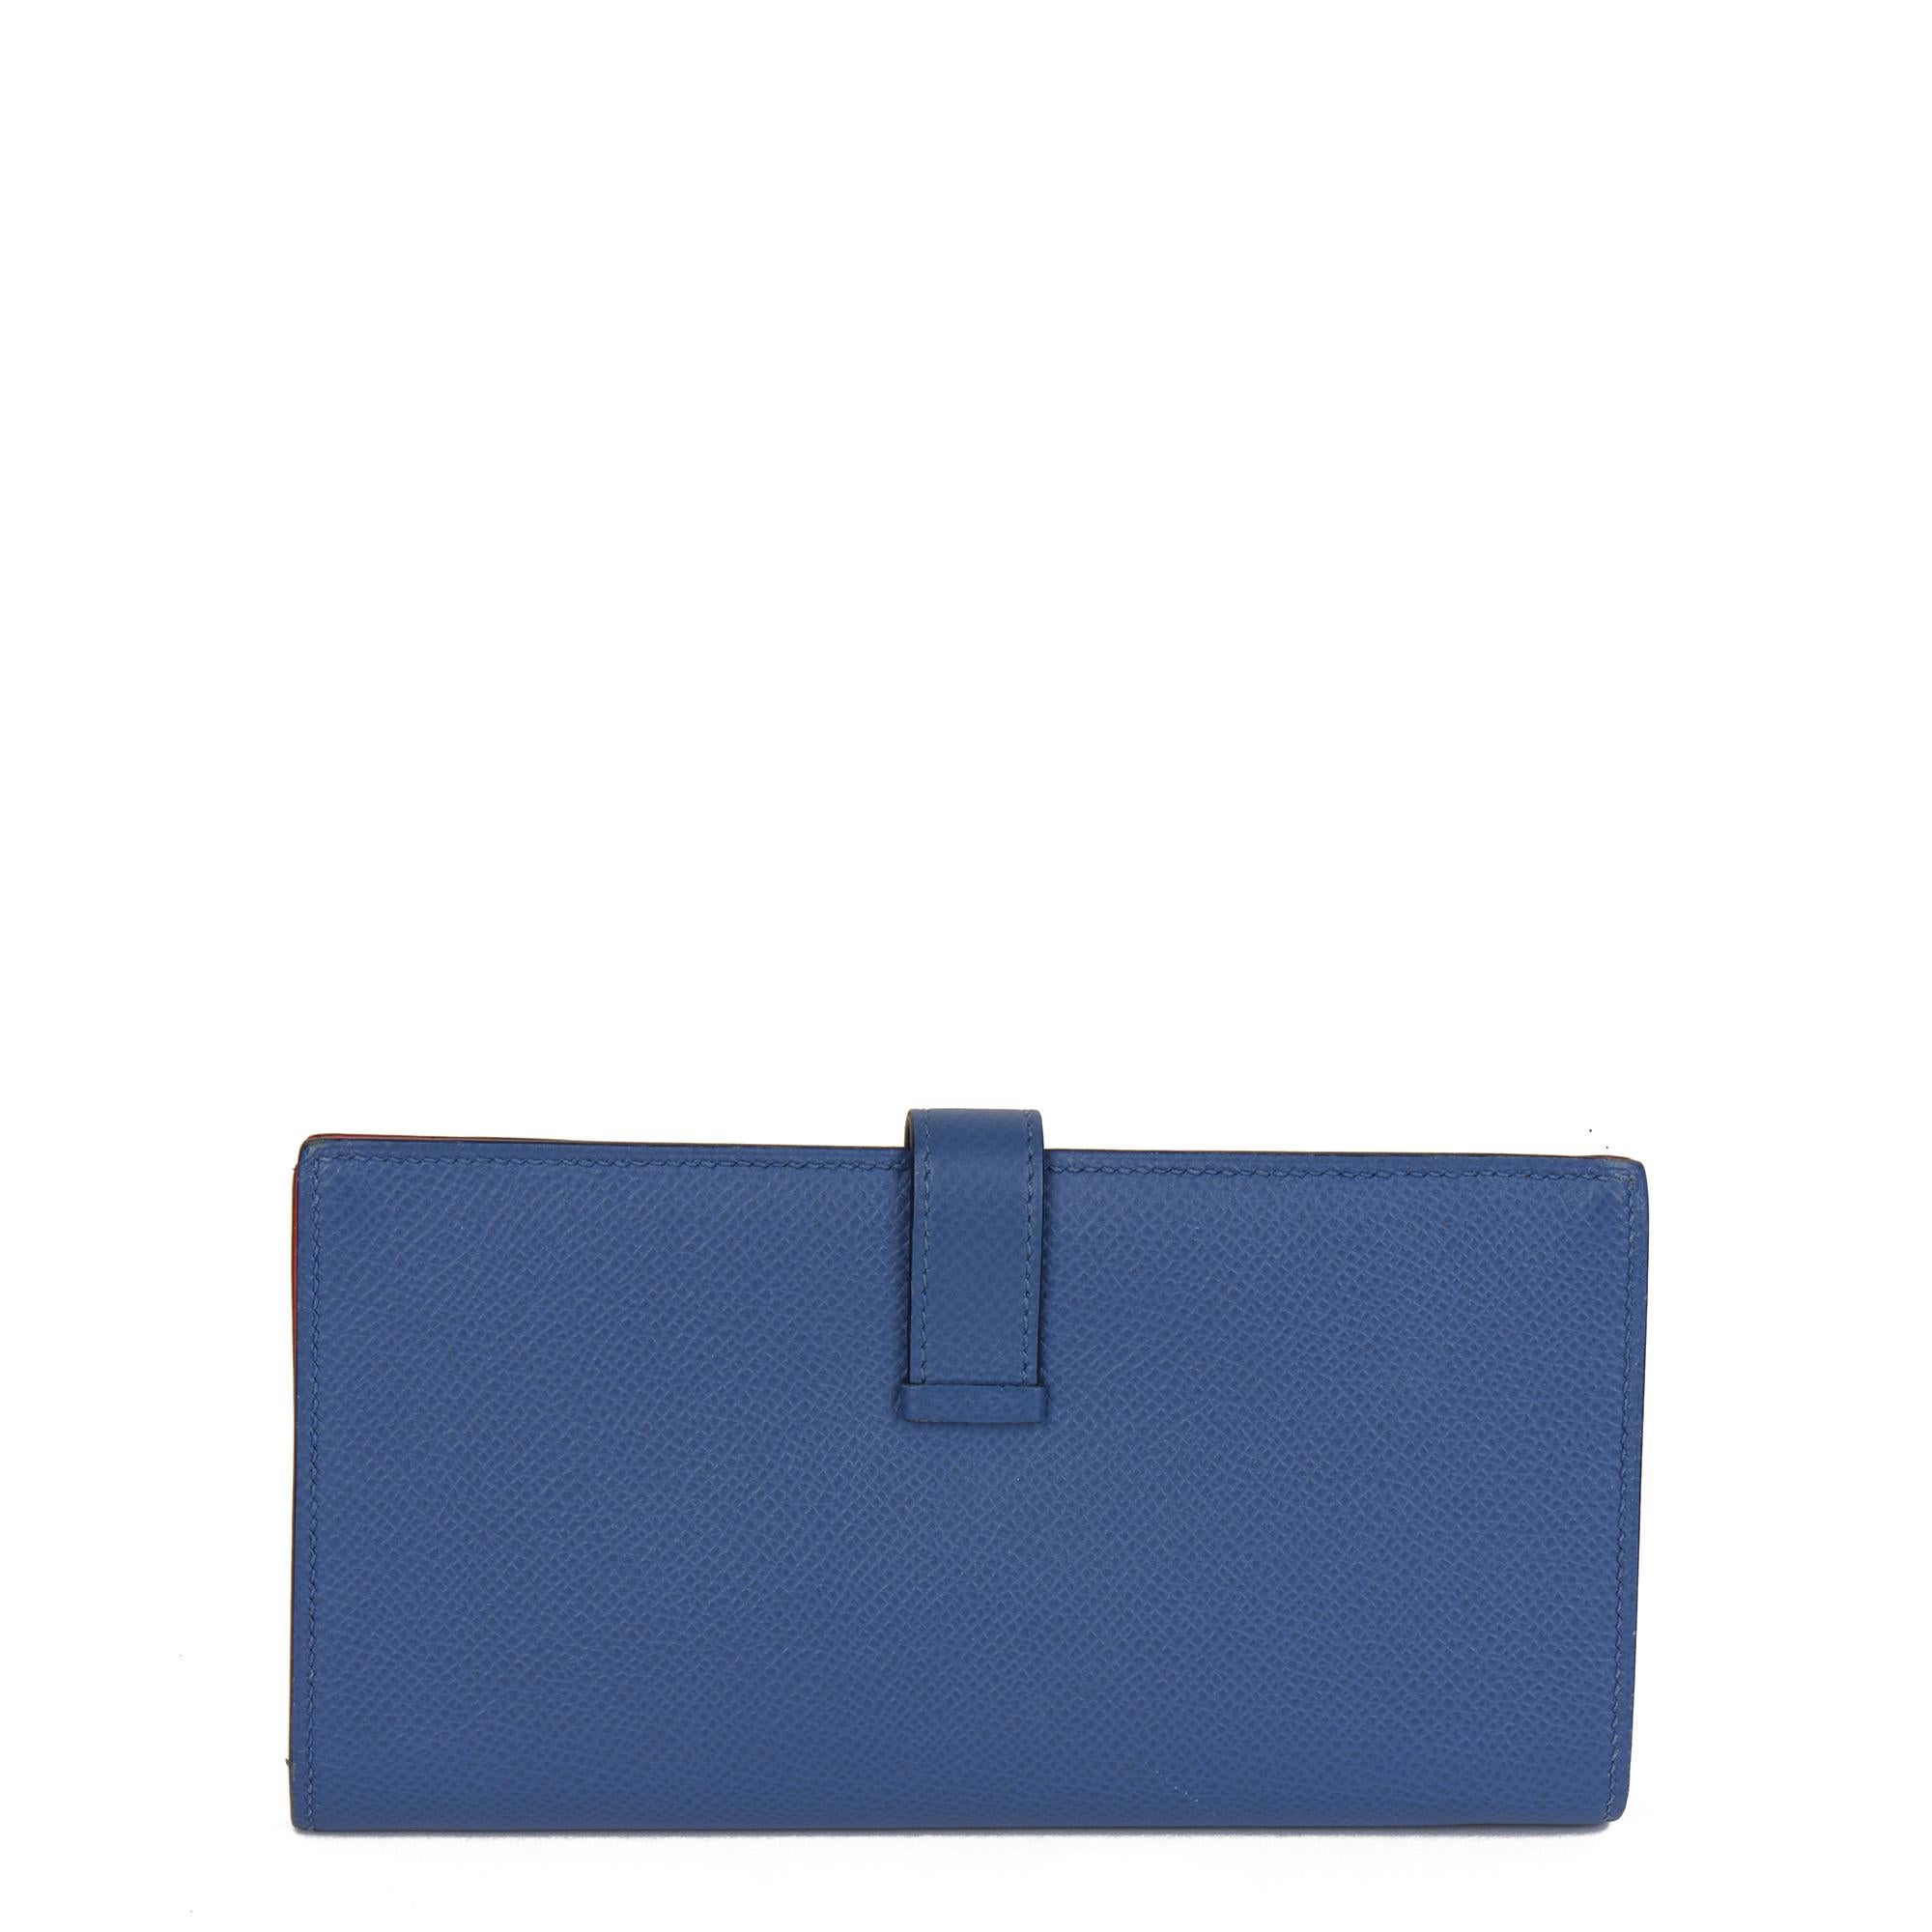 Hermès BLUE BRIGHTON & CAPUCINE EPSOM LEATHER BEARN WALLET

CONDITION NOTES
The exterior is in very good condition with minimal signs of use.
The interior is in exceptional condition with minimal signs of use.
The hardware is in very good condition